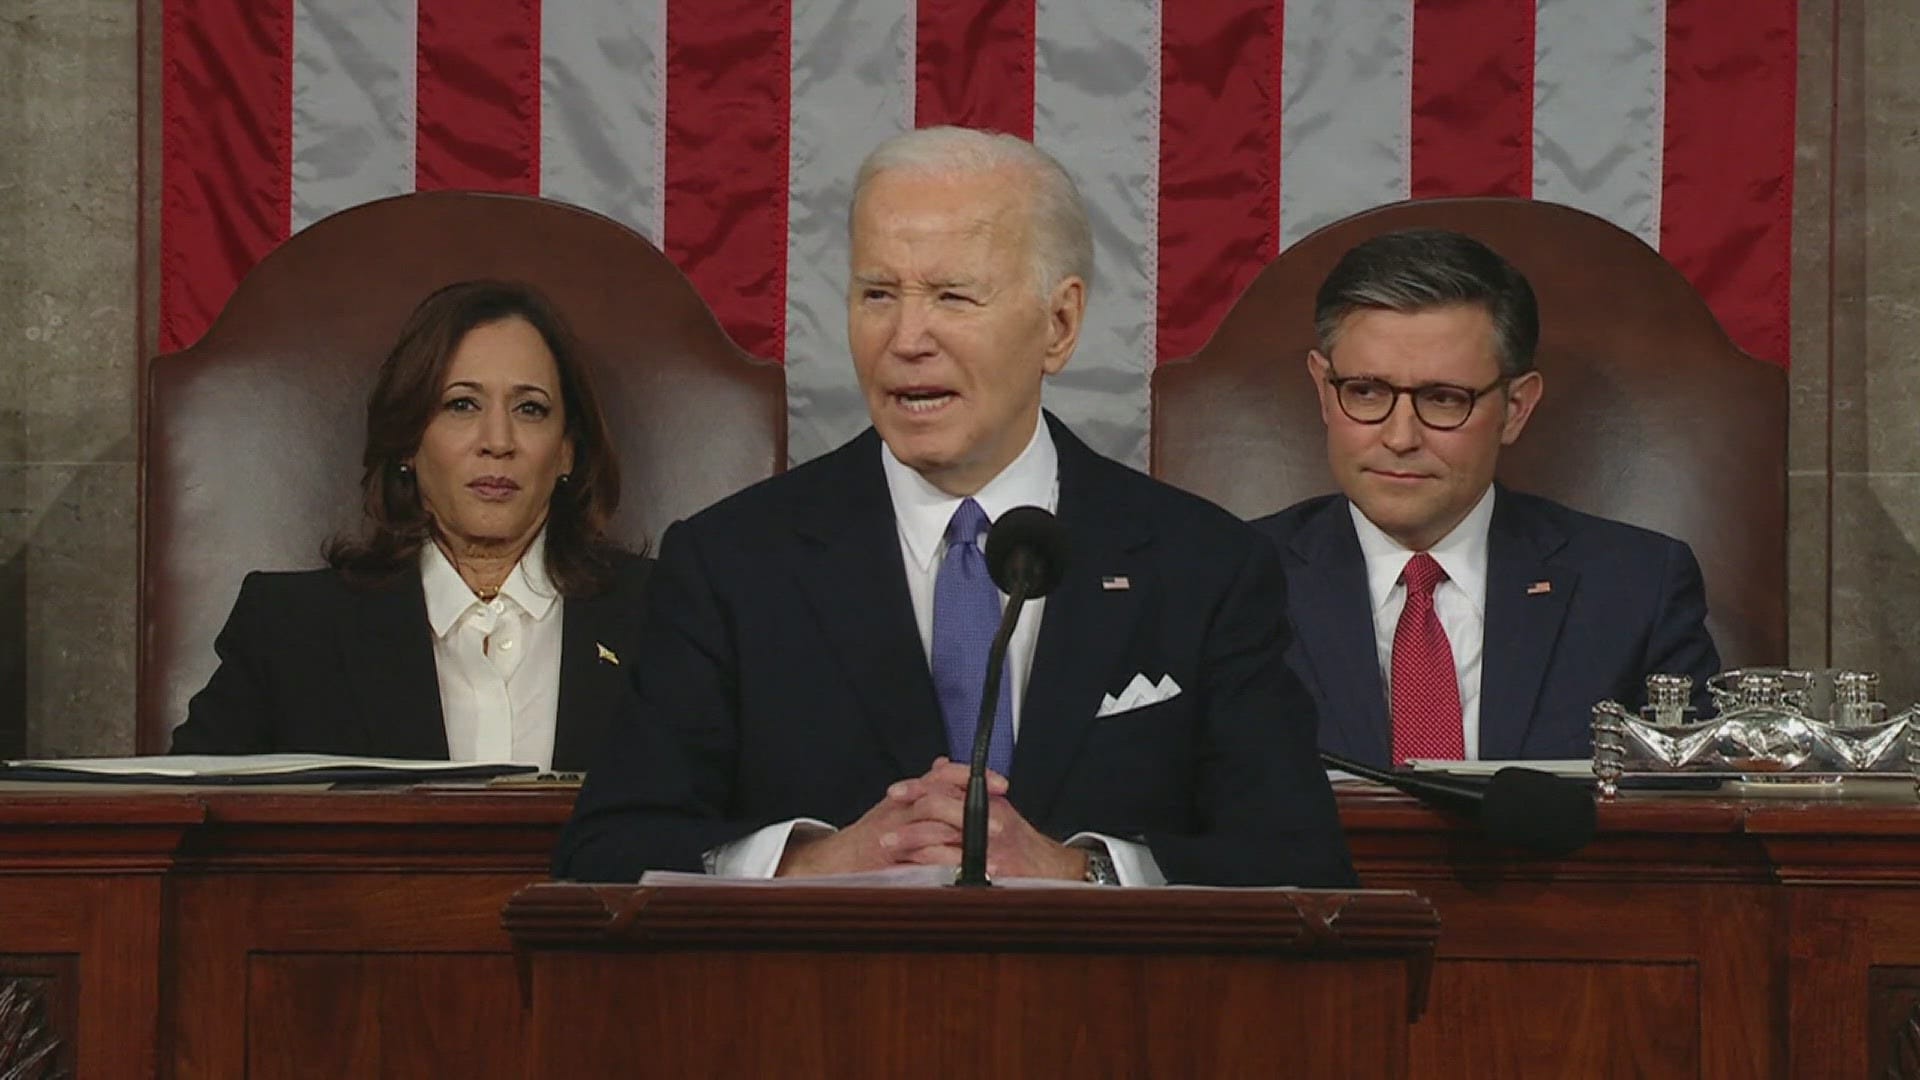 Biden Uses State of The Union As Free Electoral Publicity